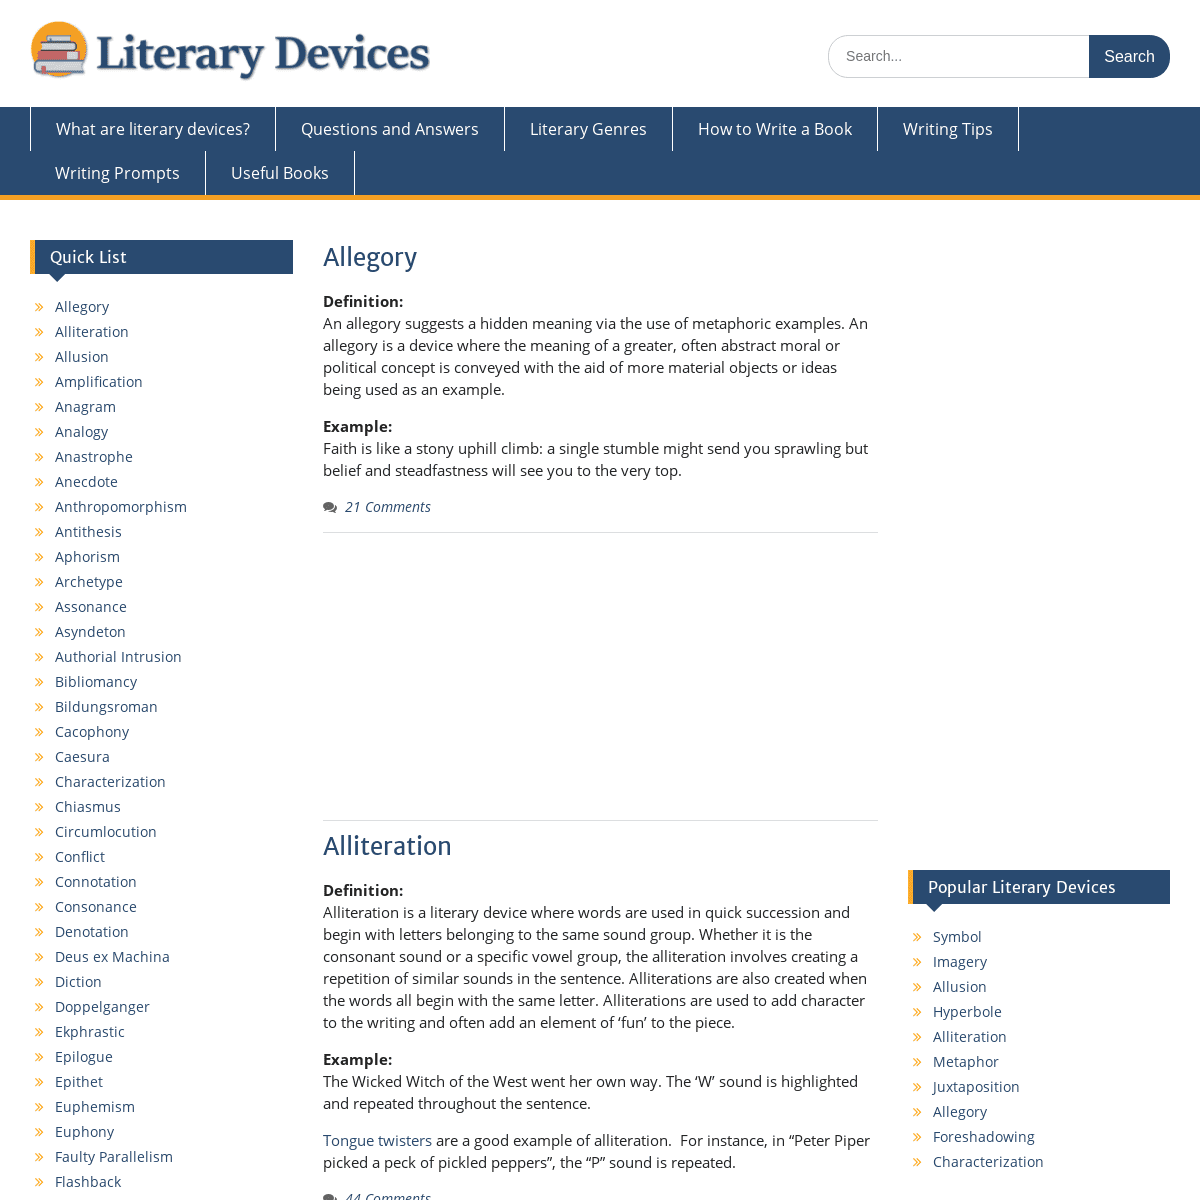 A complete backup of literary-devices.com